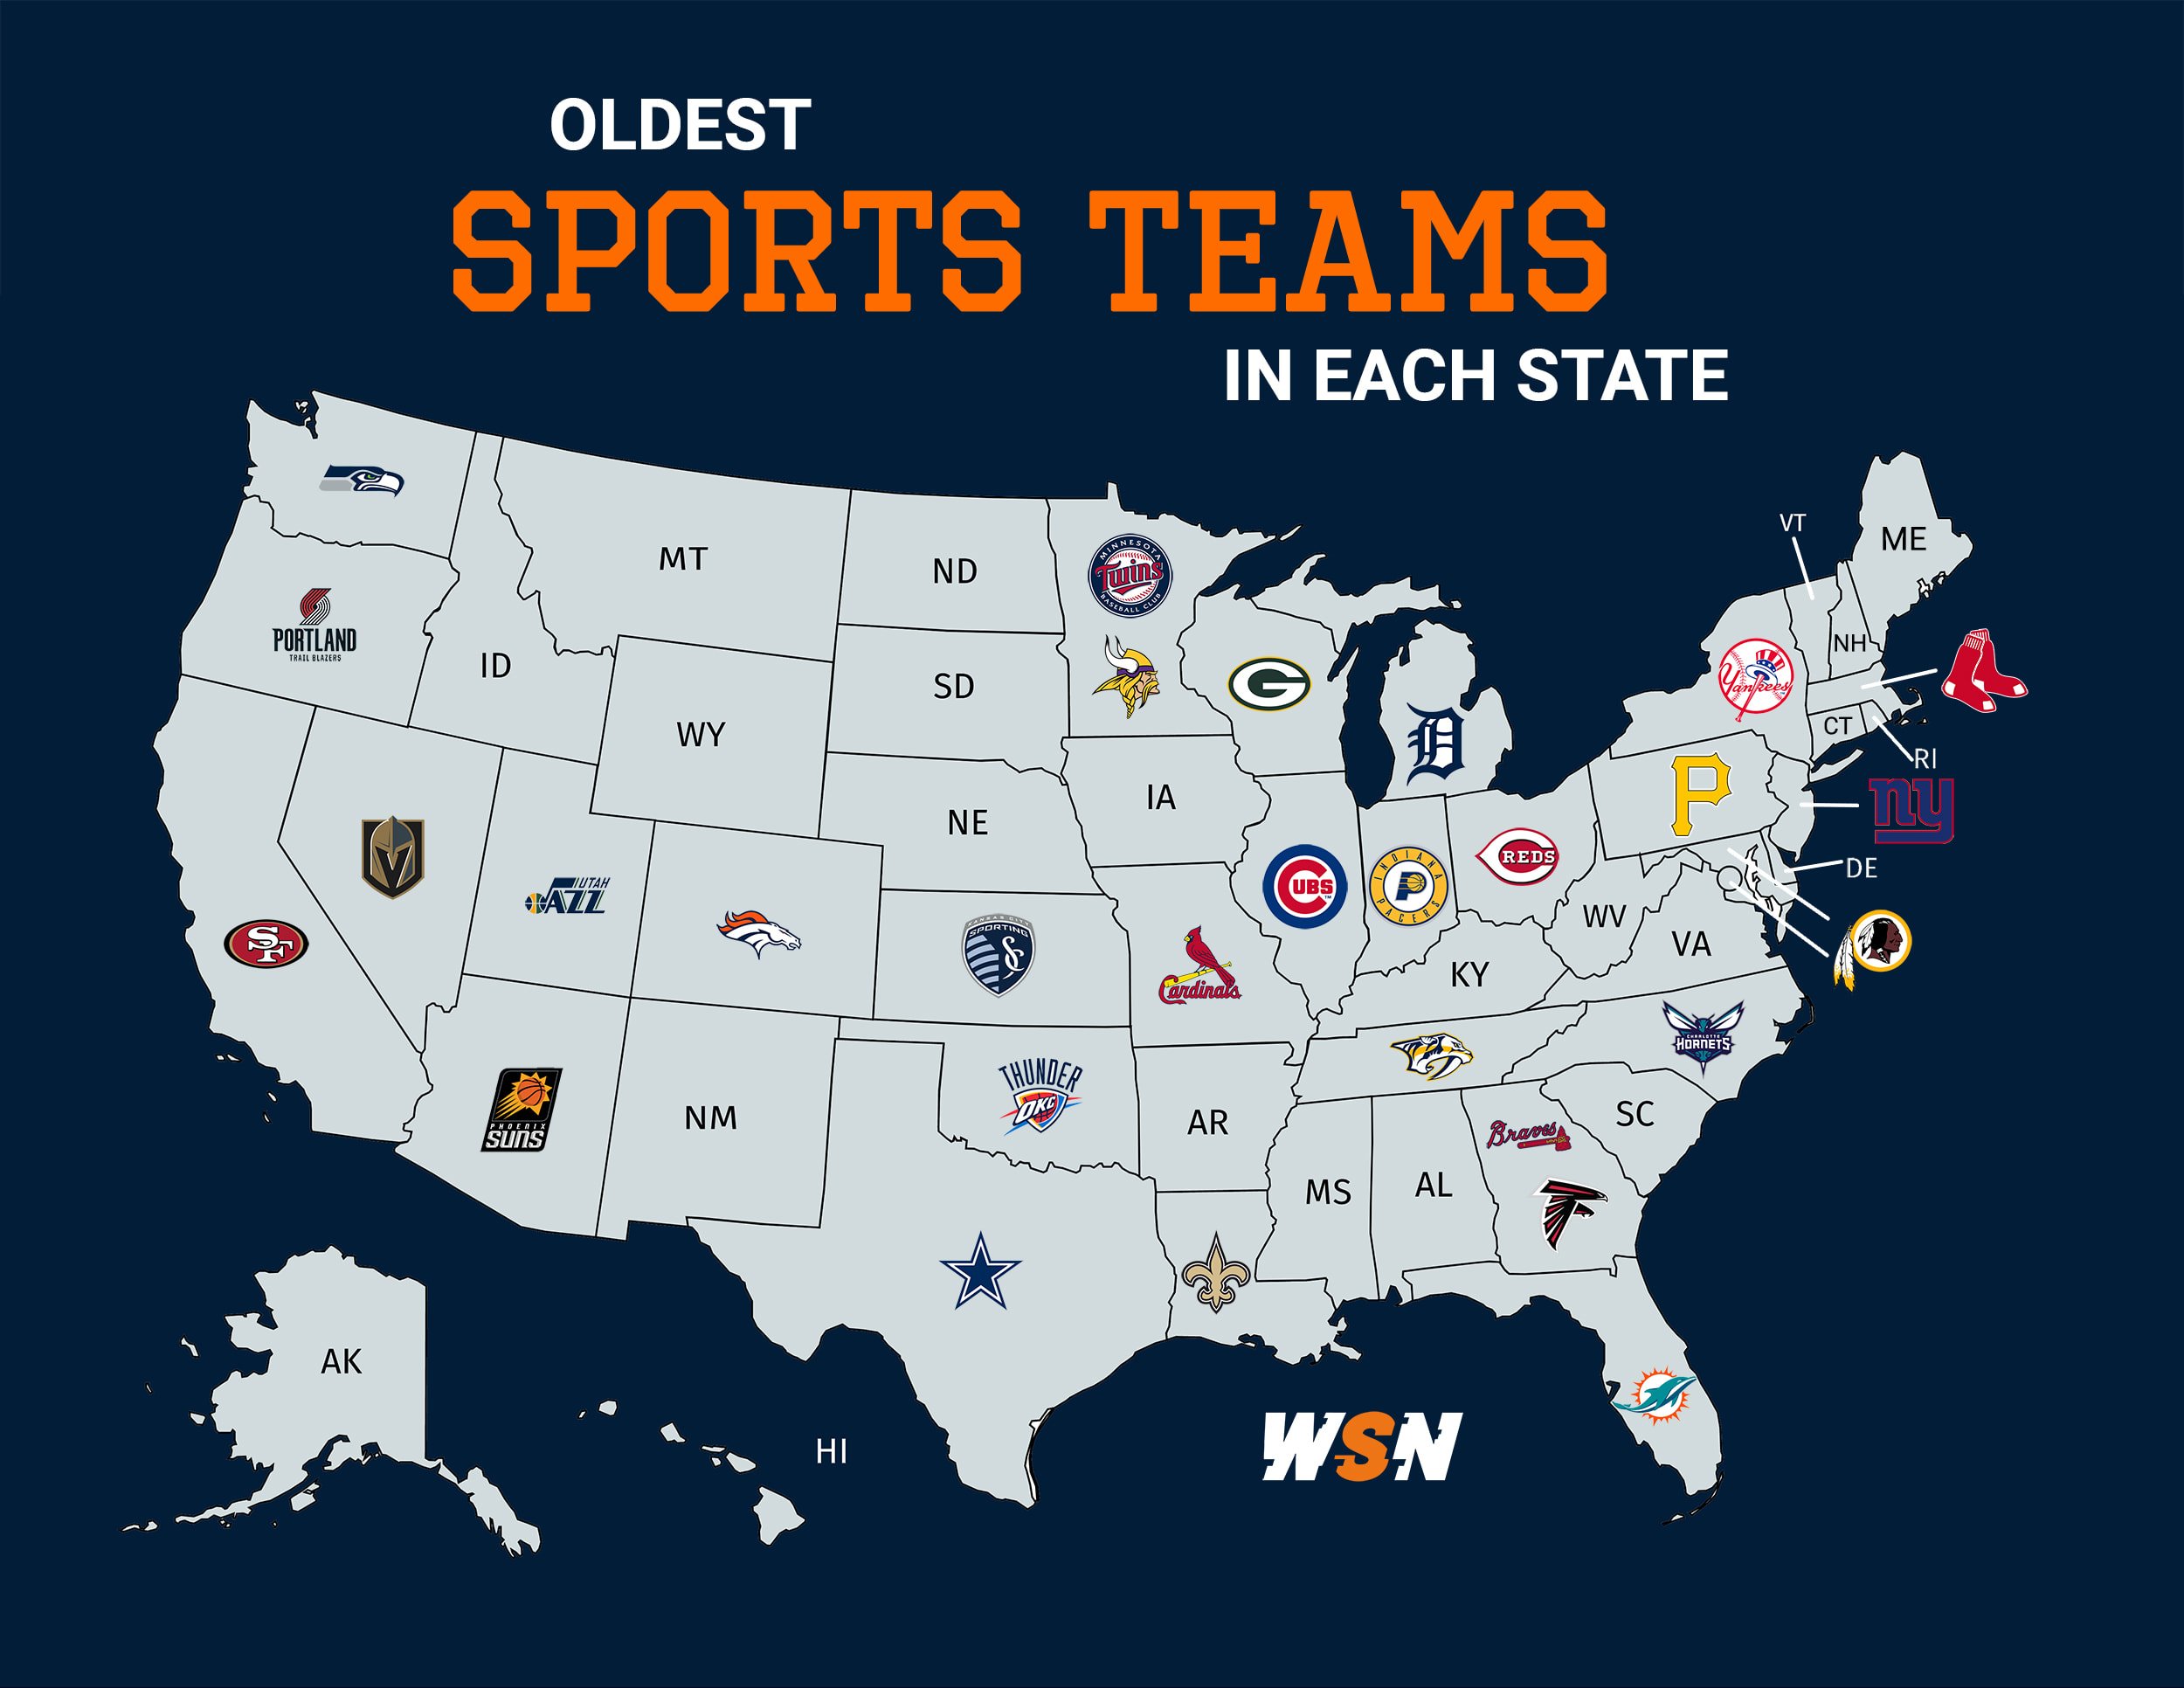 Oldest sports teams in the US